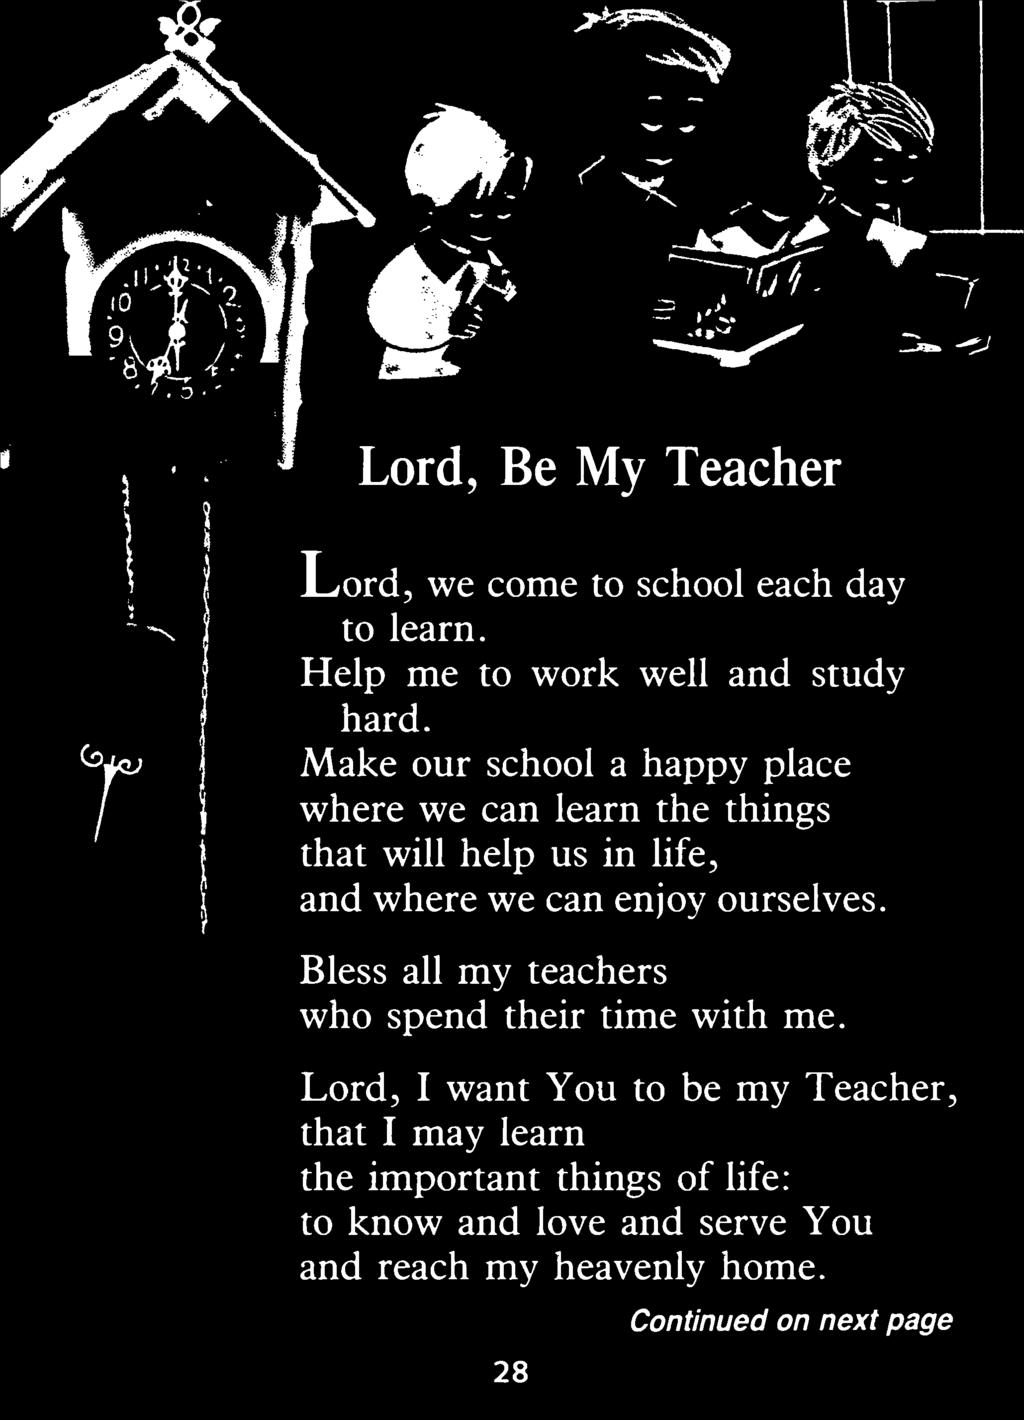 enjoy ourselves. Bless all my teachers who spend their time with me.